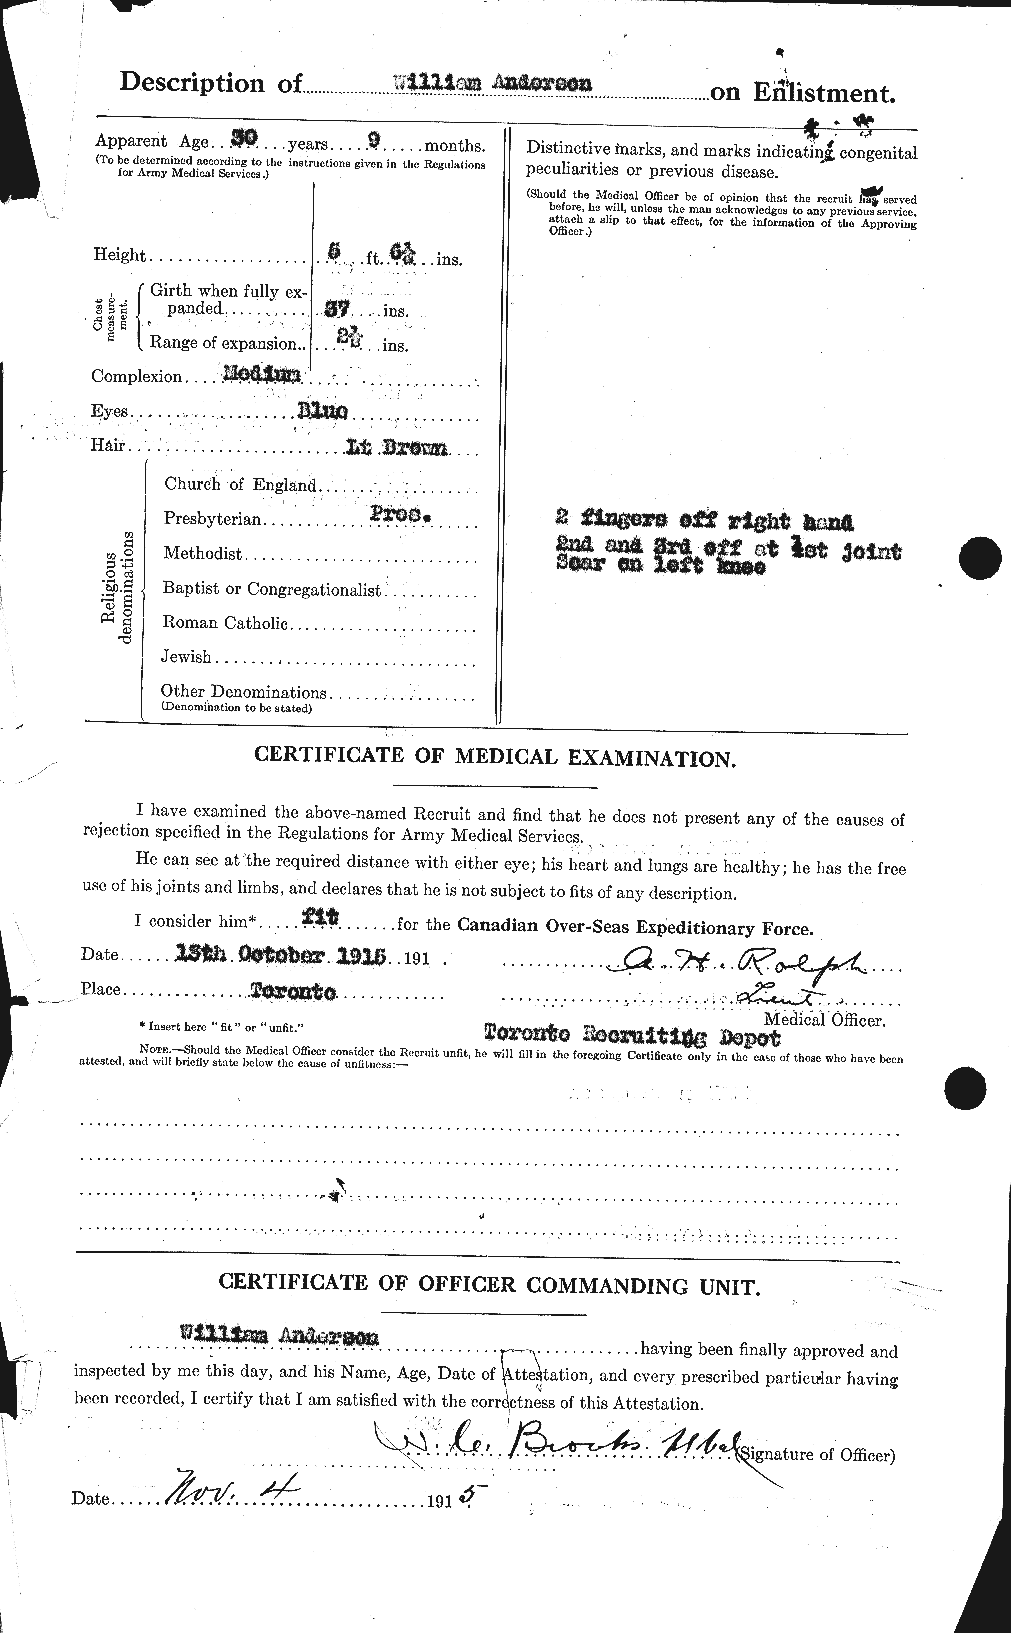 Personnel Records of the First World War - CEF 210763b